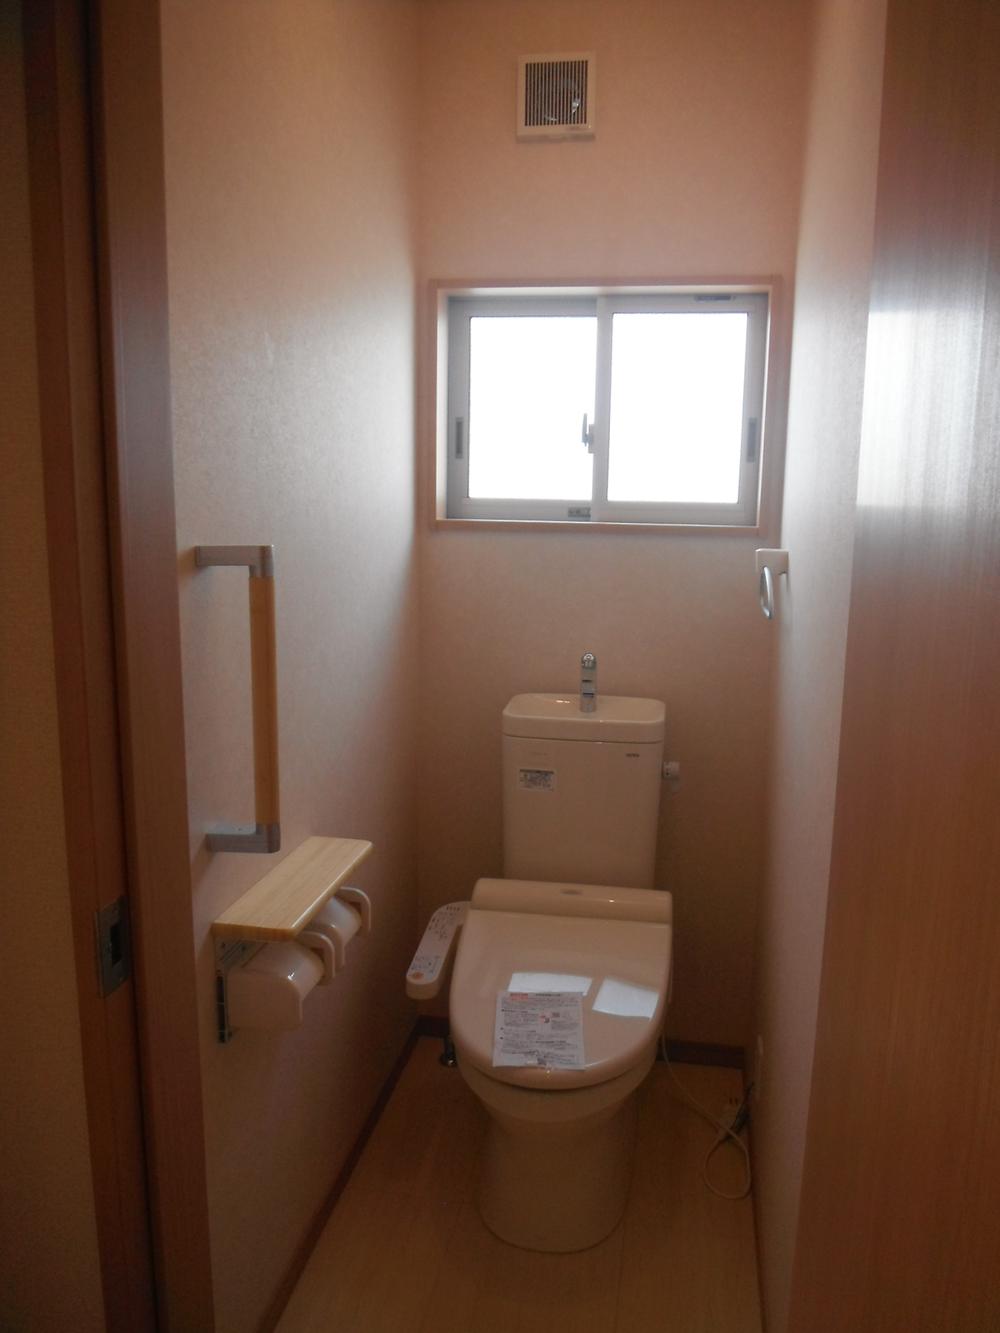 Toilet. (With washlet) second floor toilet <is a complete image>